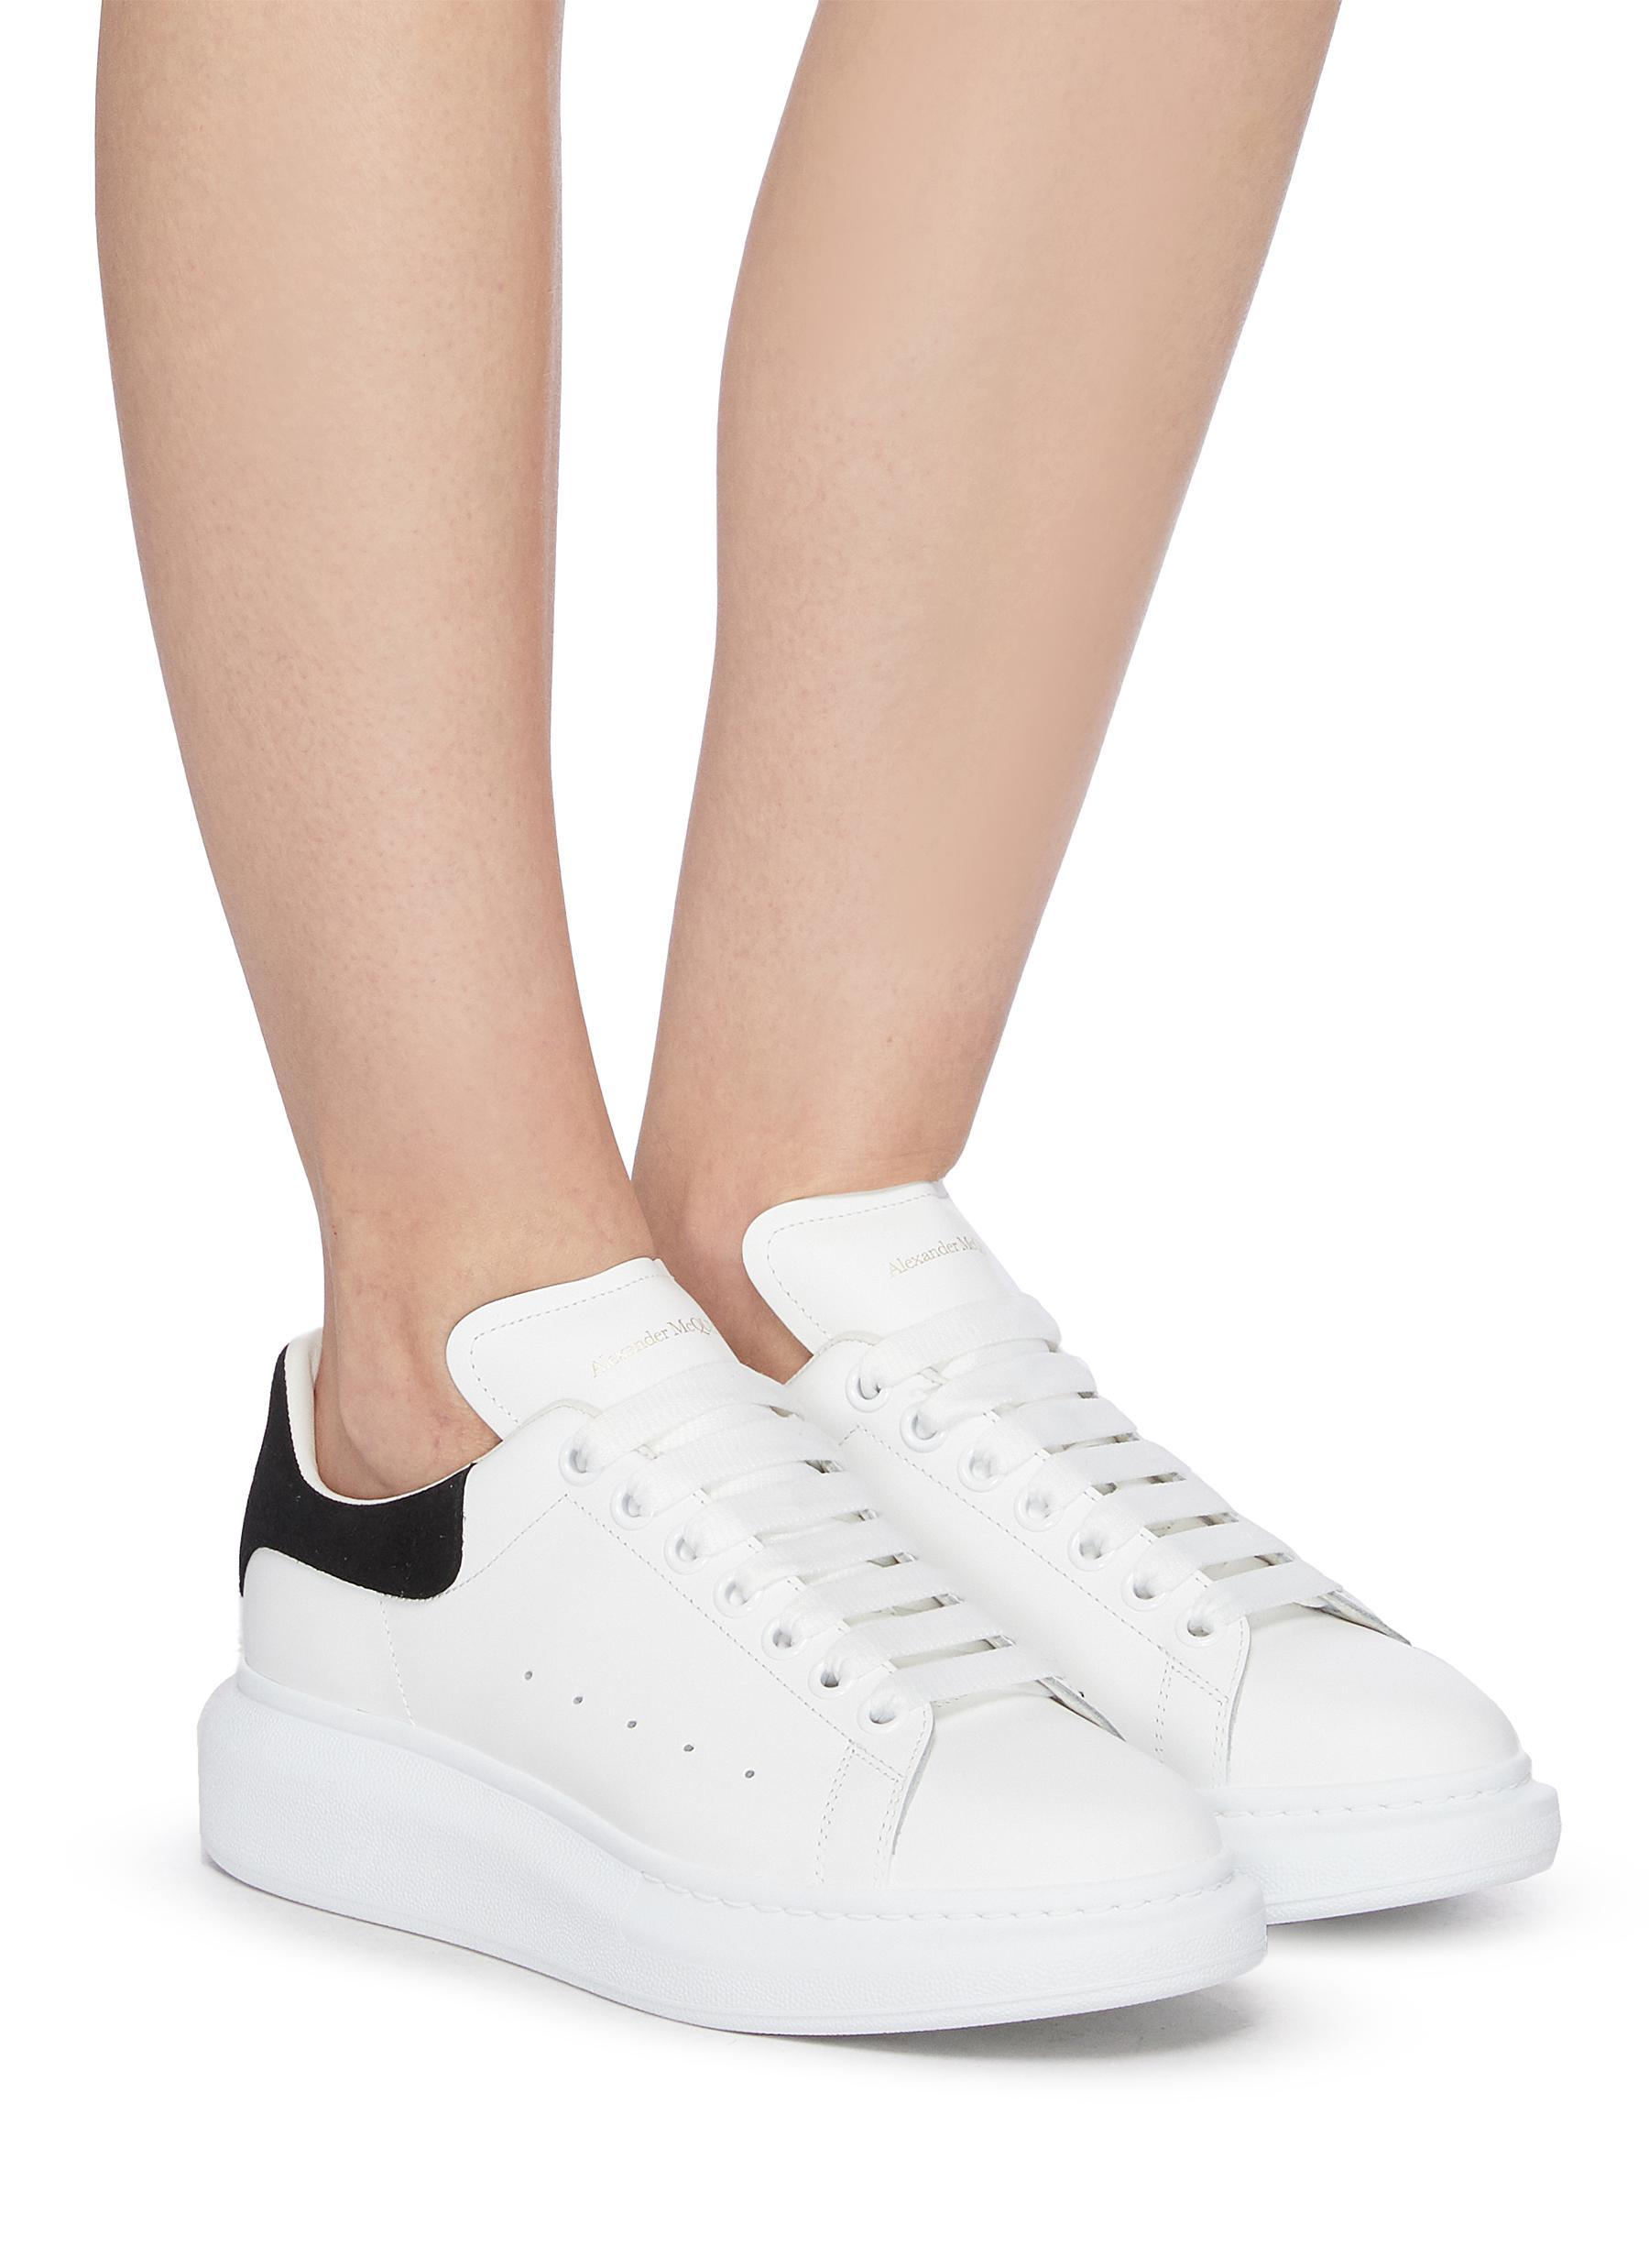 Alexander McQueen Oversized Leather Sneakers Women Shoes Sneakers Low-top  Oversized Leather Sneakers in White - Lyst